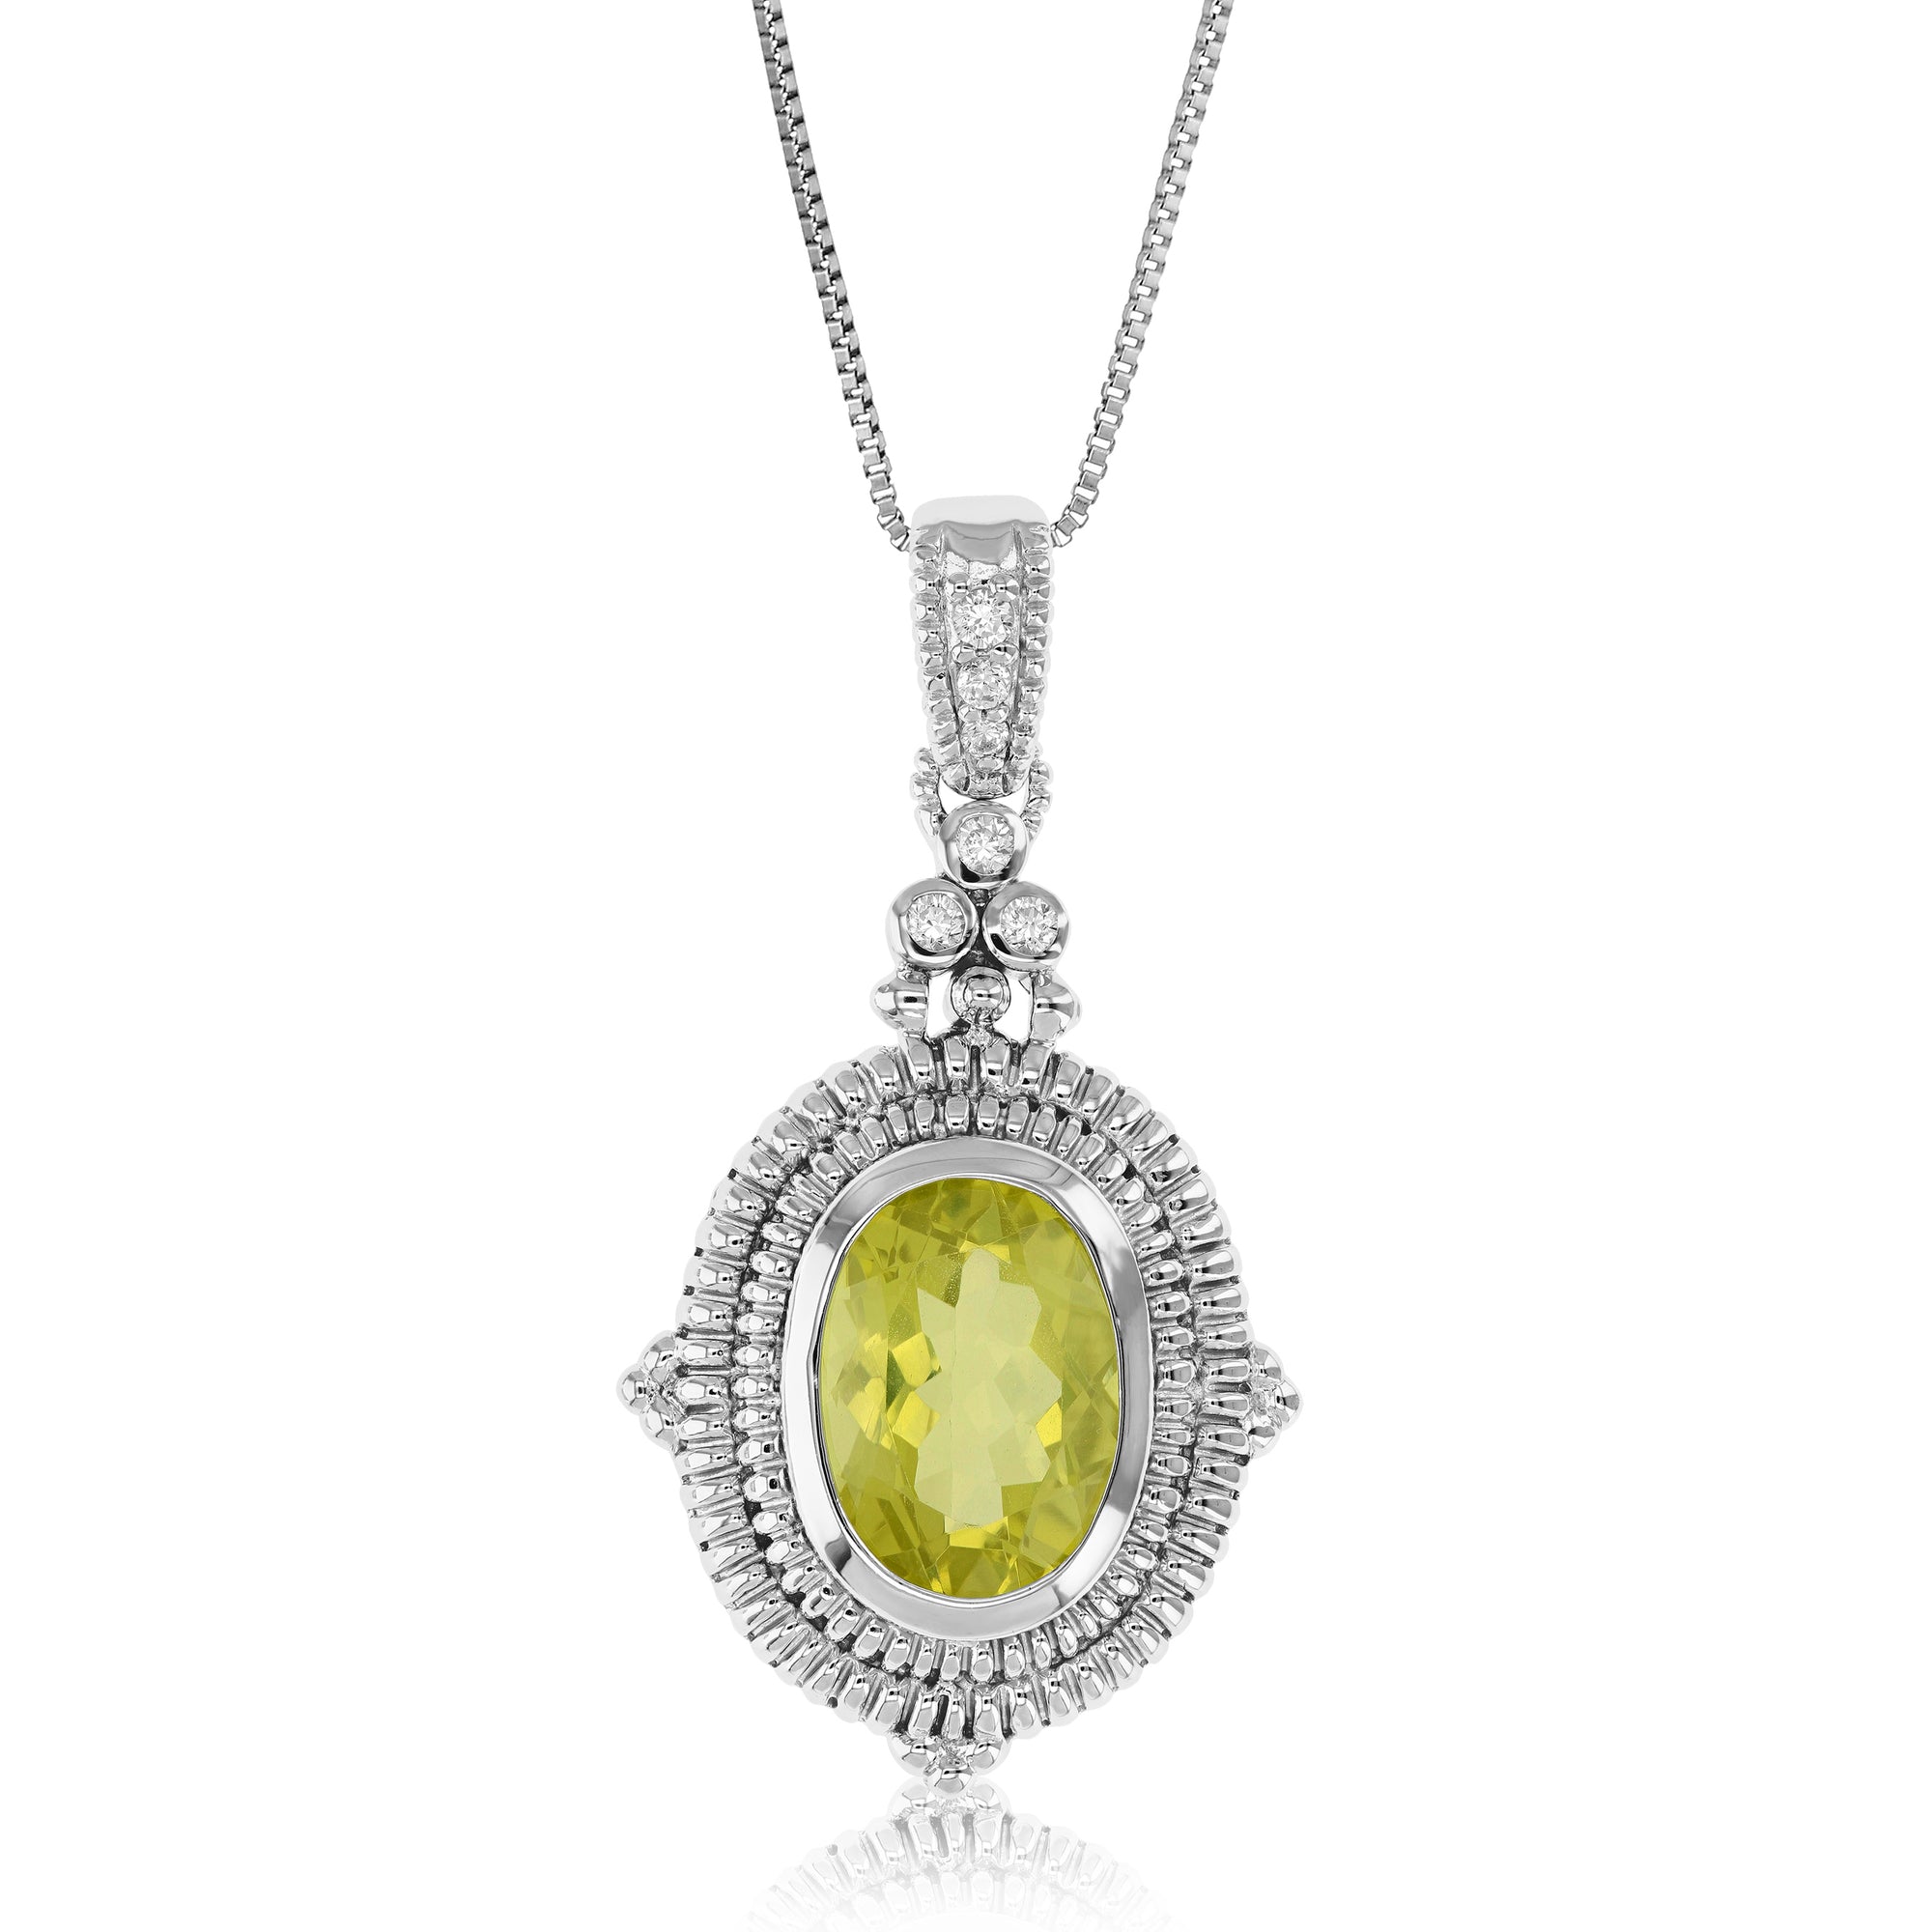 5 cttw Pendant Necklace, Lemon Quartz Oval Pendant Necklace for Women in .925 Sterling Silver with Rhodium, 18 Inch Chain, Prong Setting